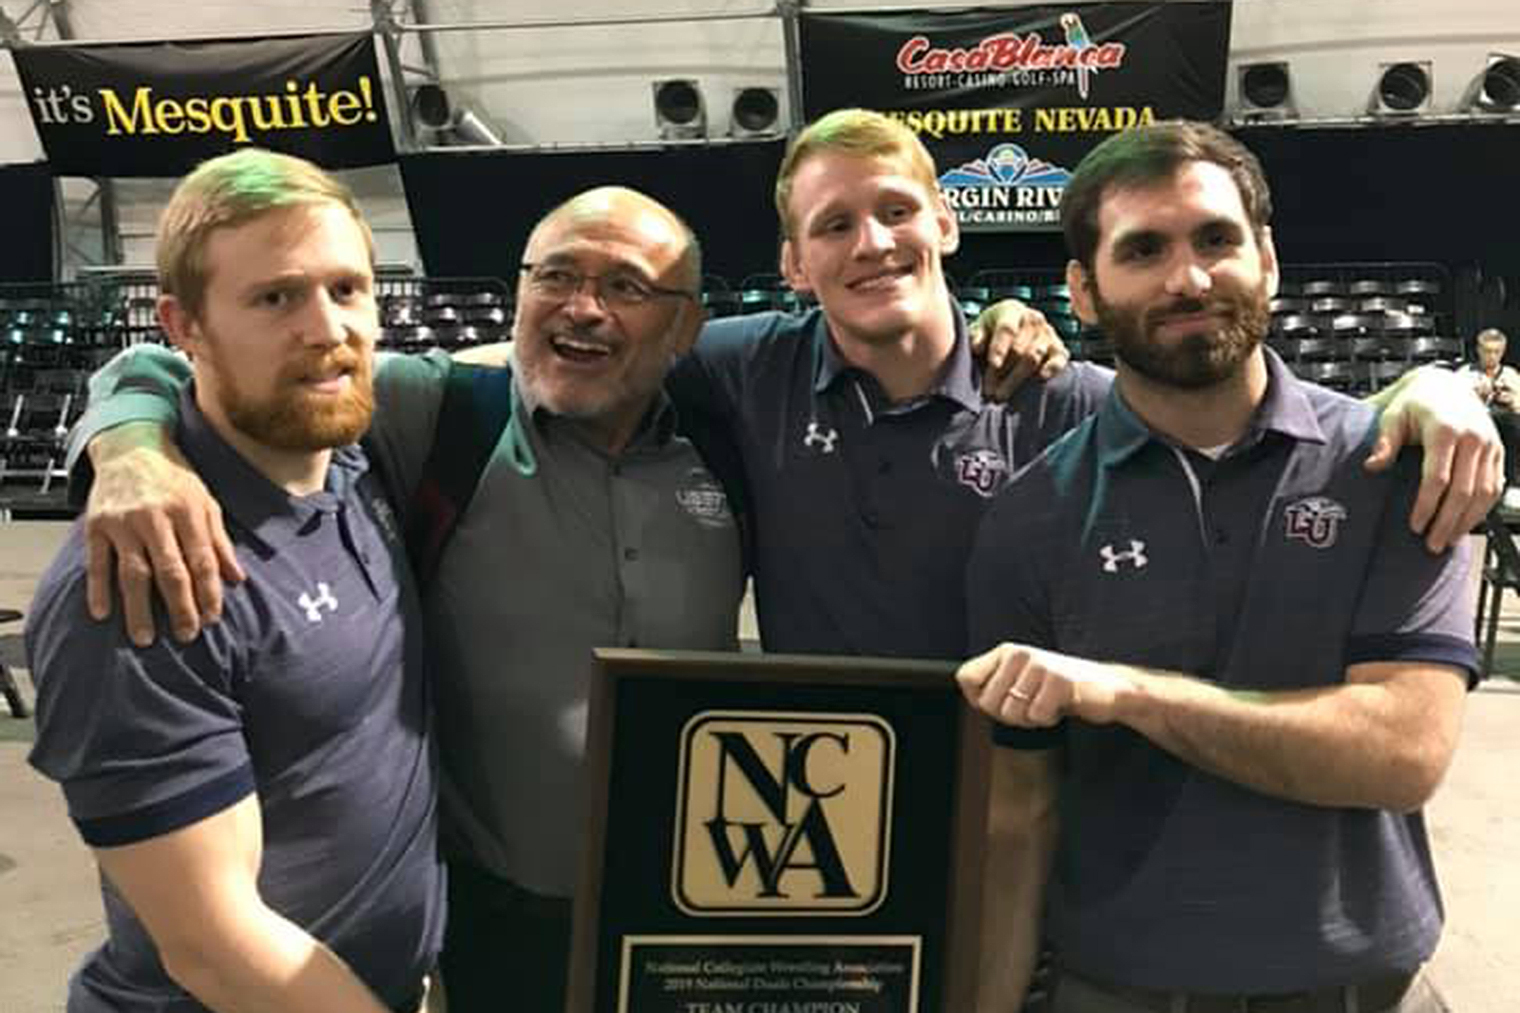 LU wrestlers first team ever to defend NCWA National Duals title